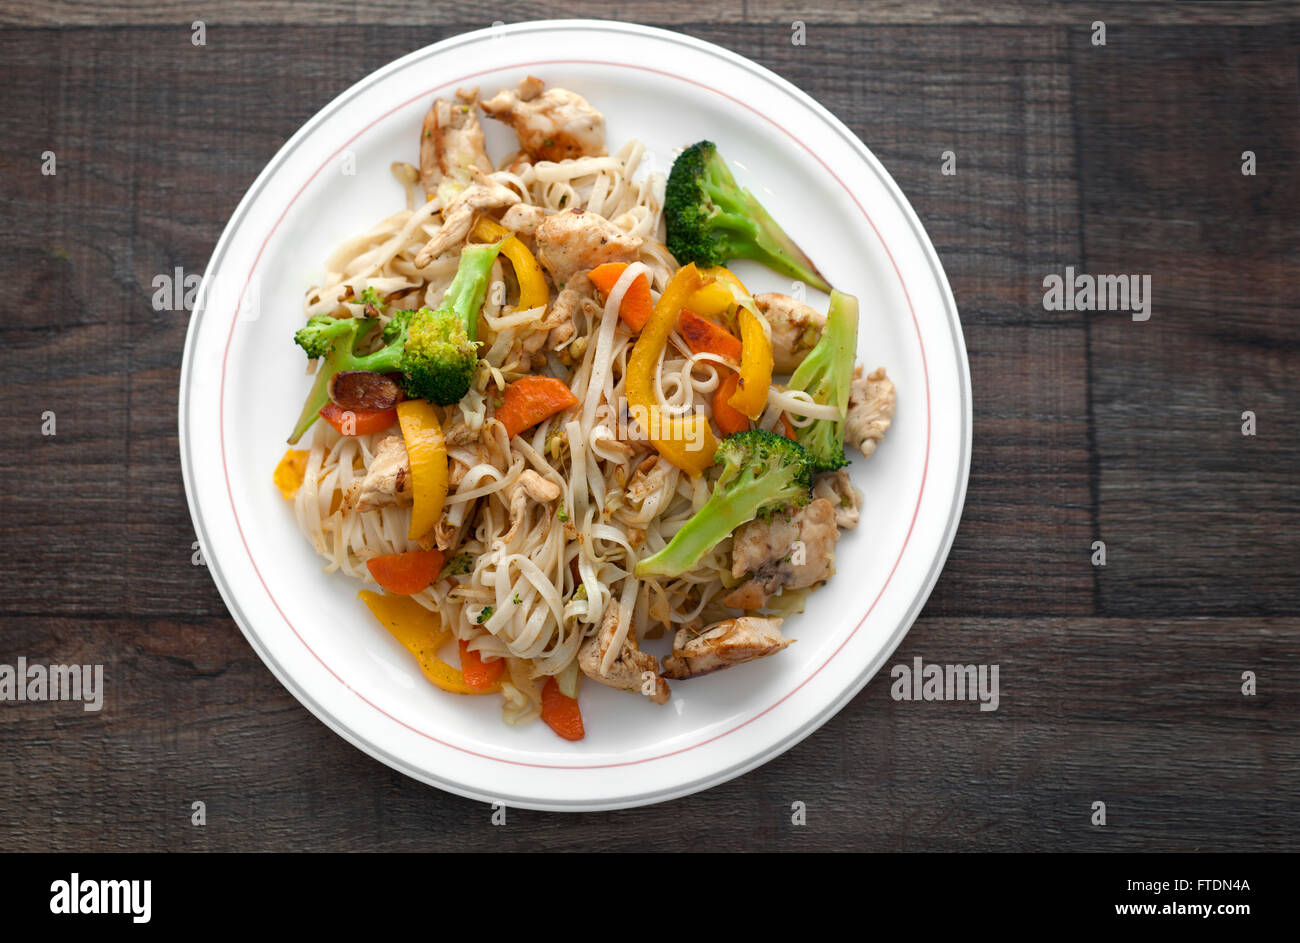 Fried chicken noodles with vegetables broccoli, cabbage, paprika and carrots. Stock Photo